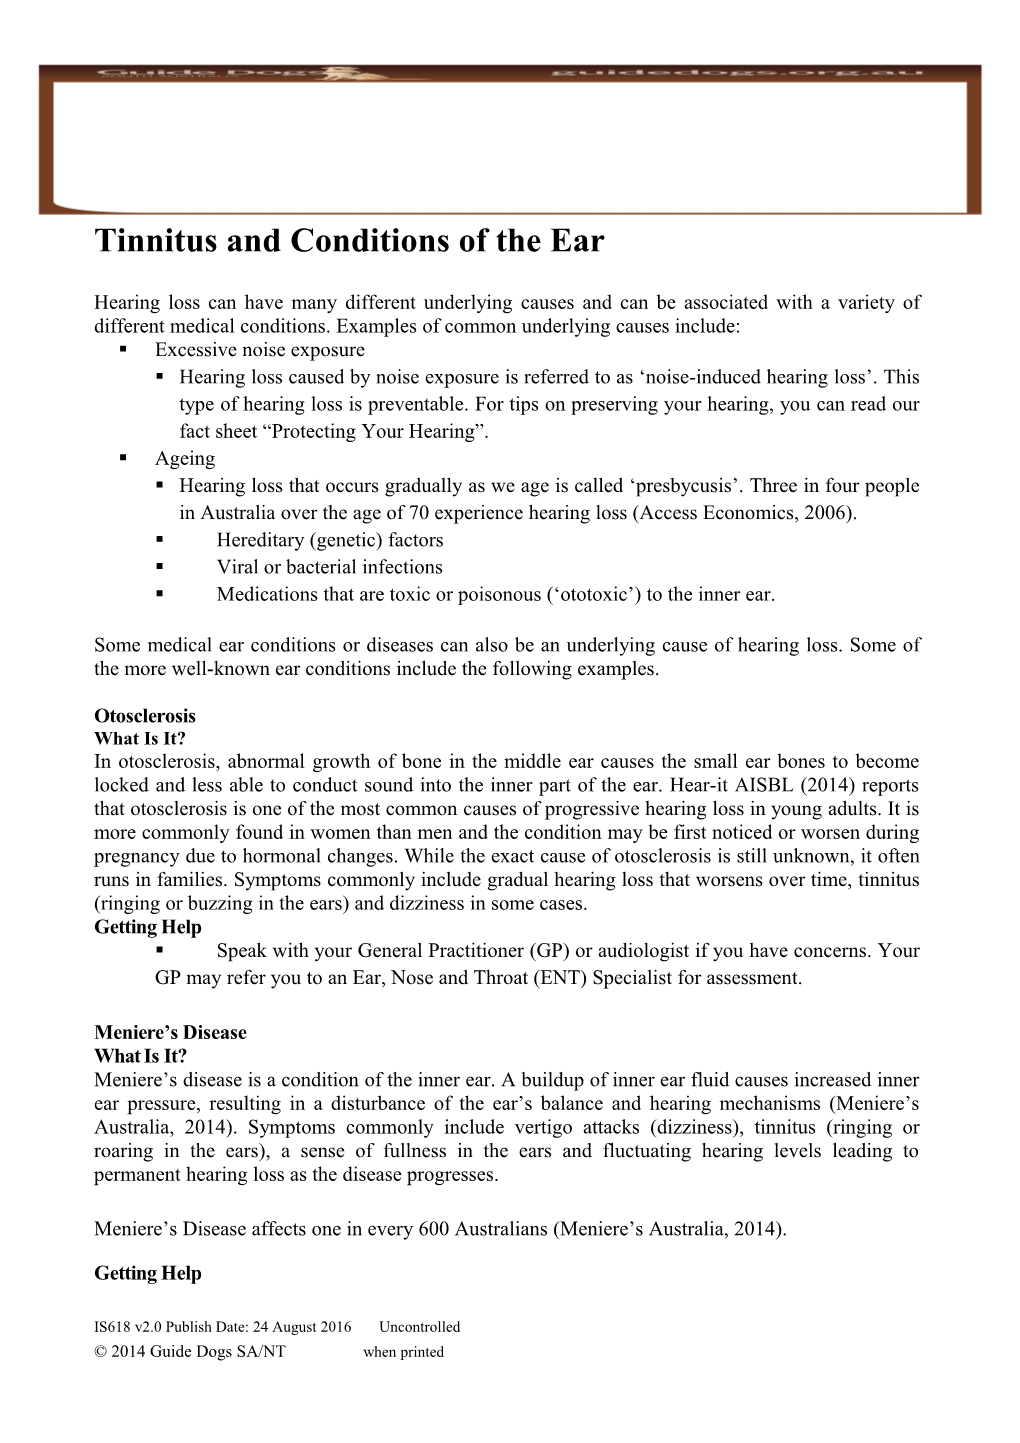 Tinnitus and Conditions of the Ear